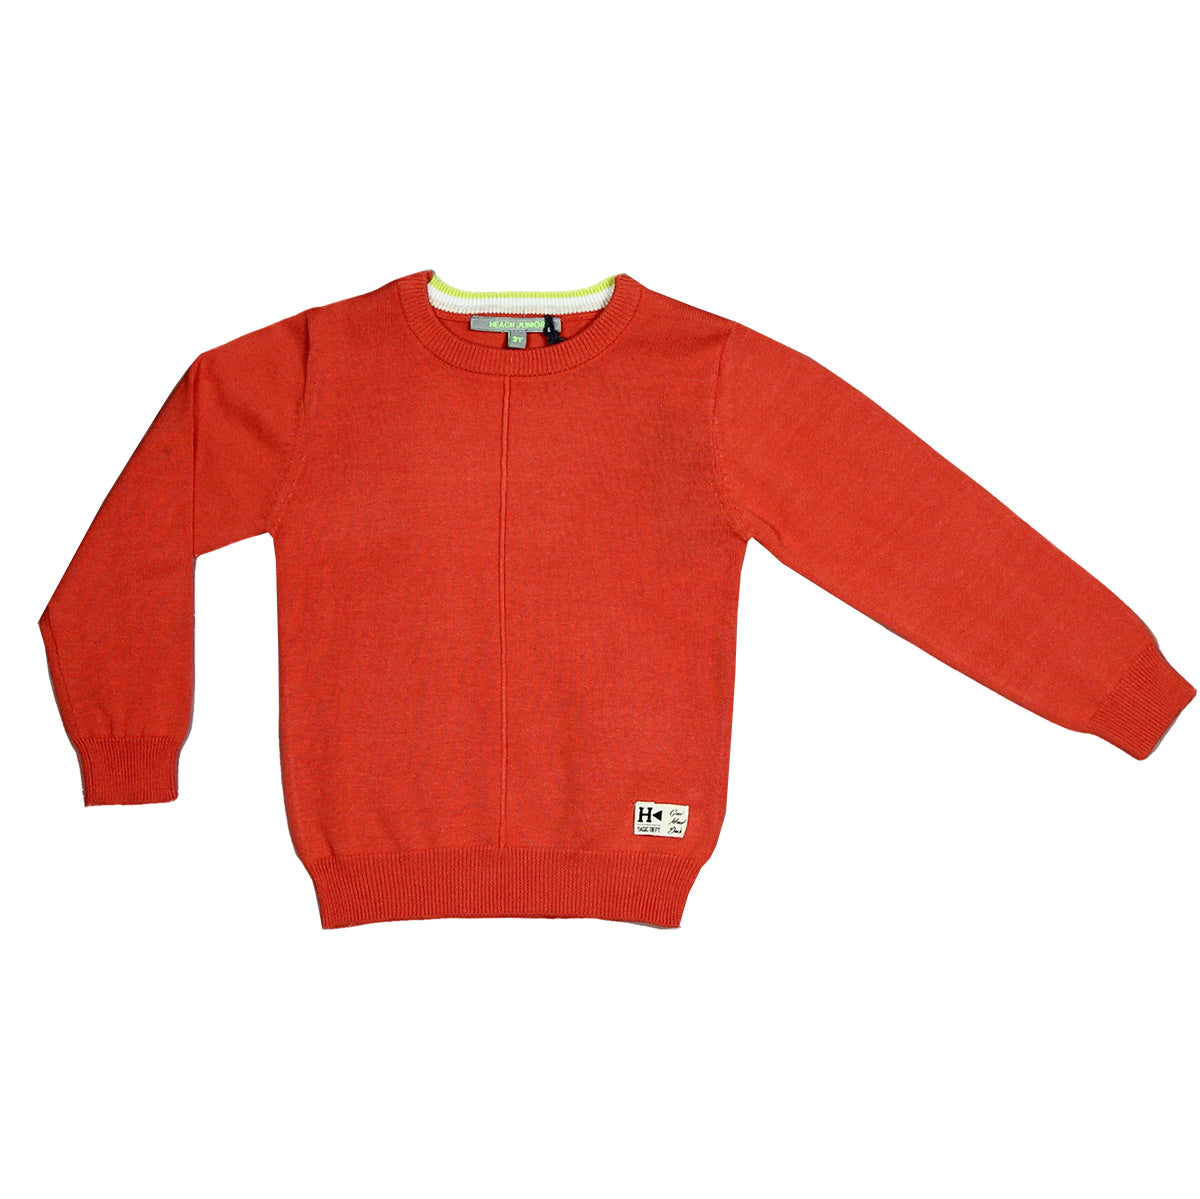 Sweater from the Silvian Heach Kids children's clothing line, in solid color, with inserts in con...